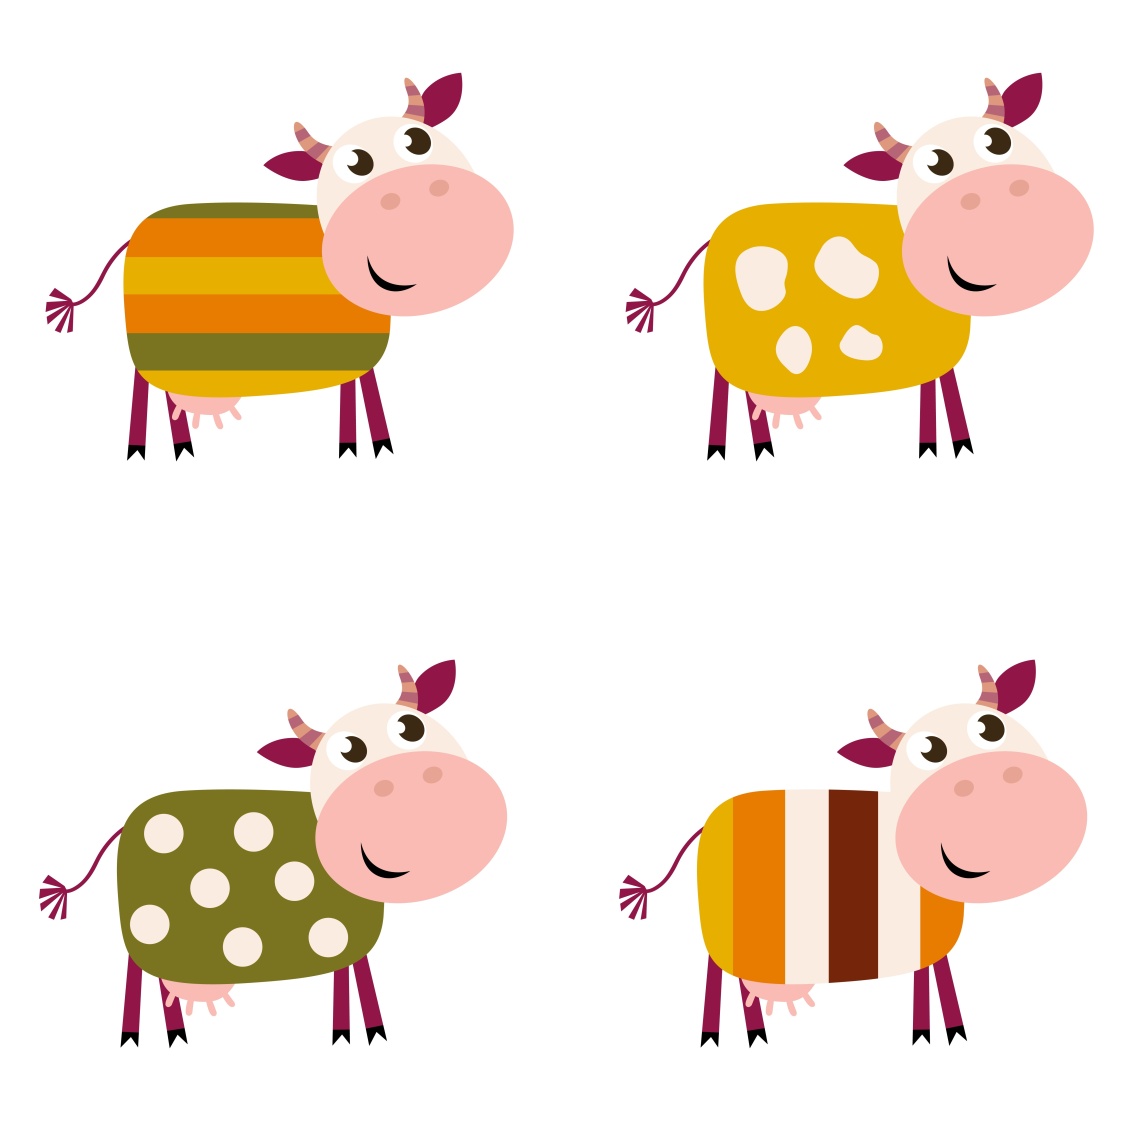 cow illustrations clipart - photo #41